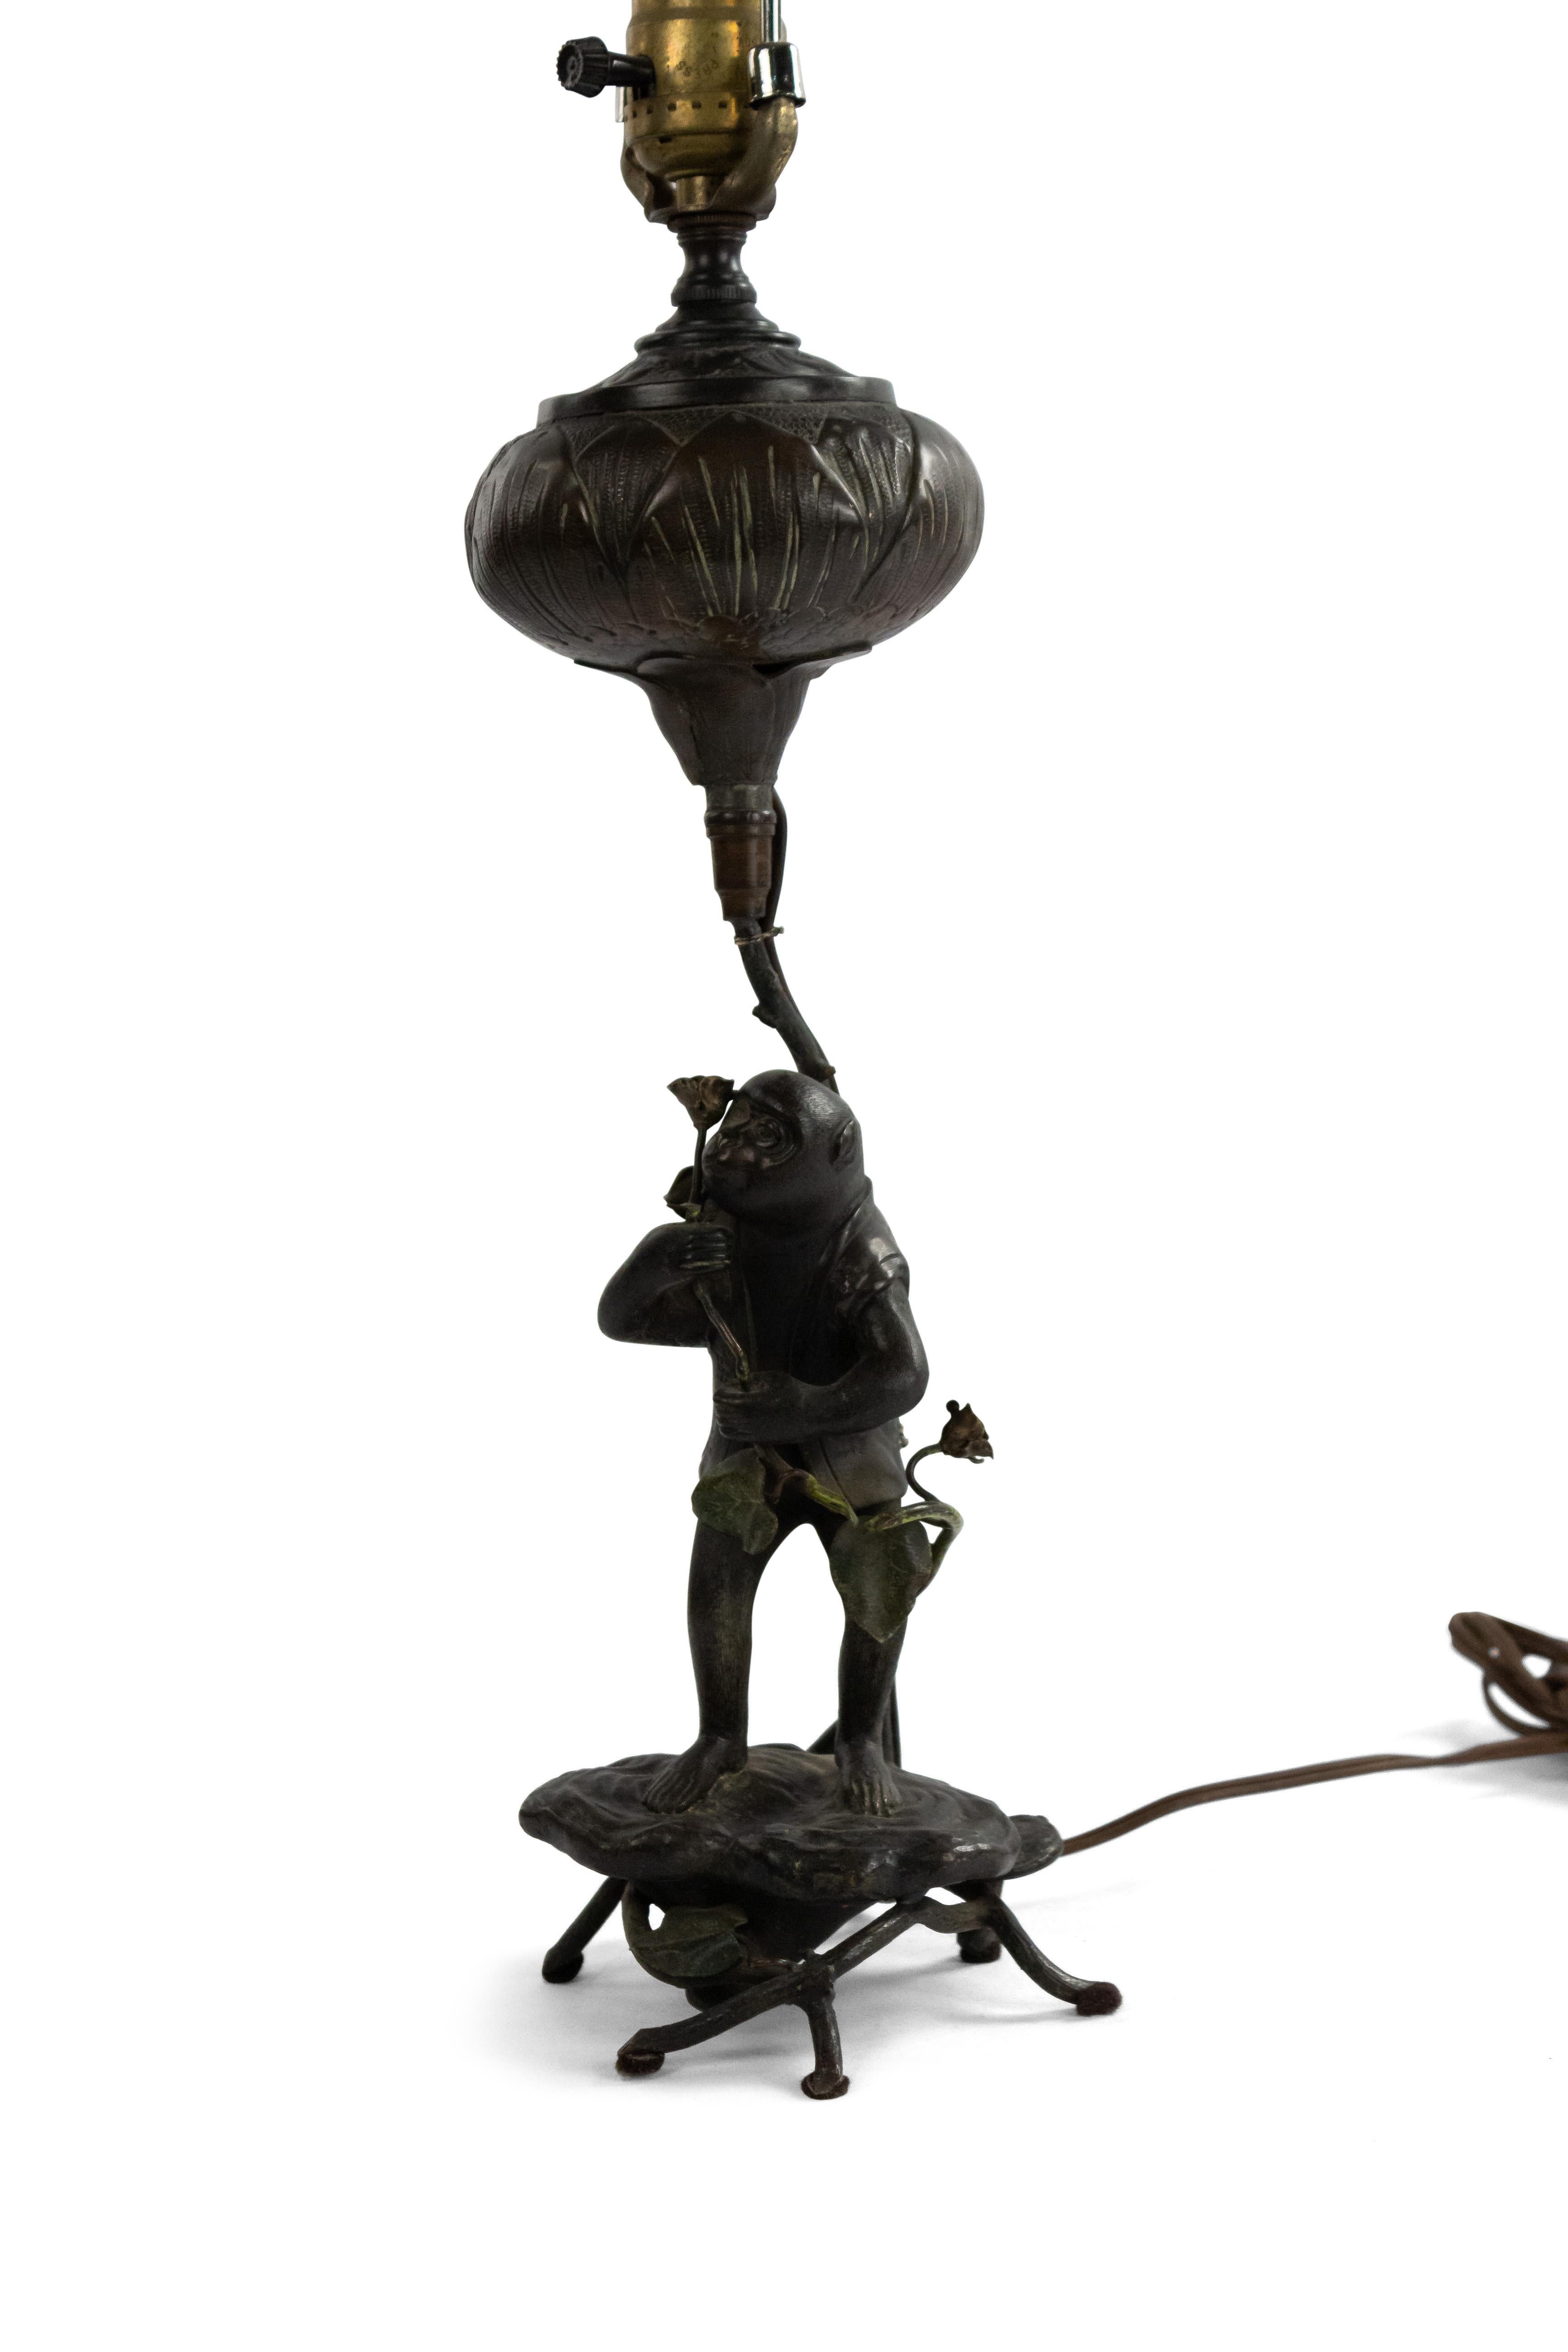 English Victorian bronze table lamp of monkey holding flower.
